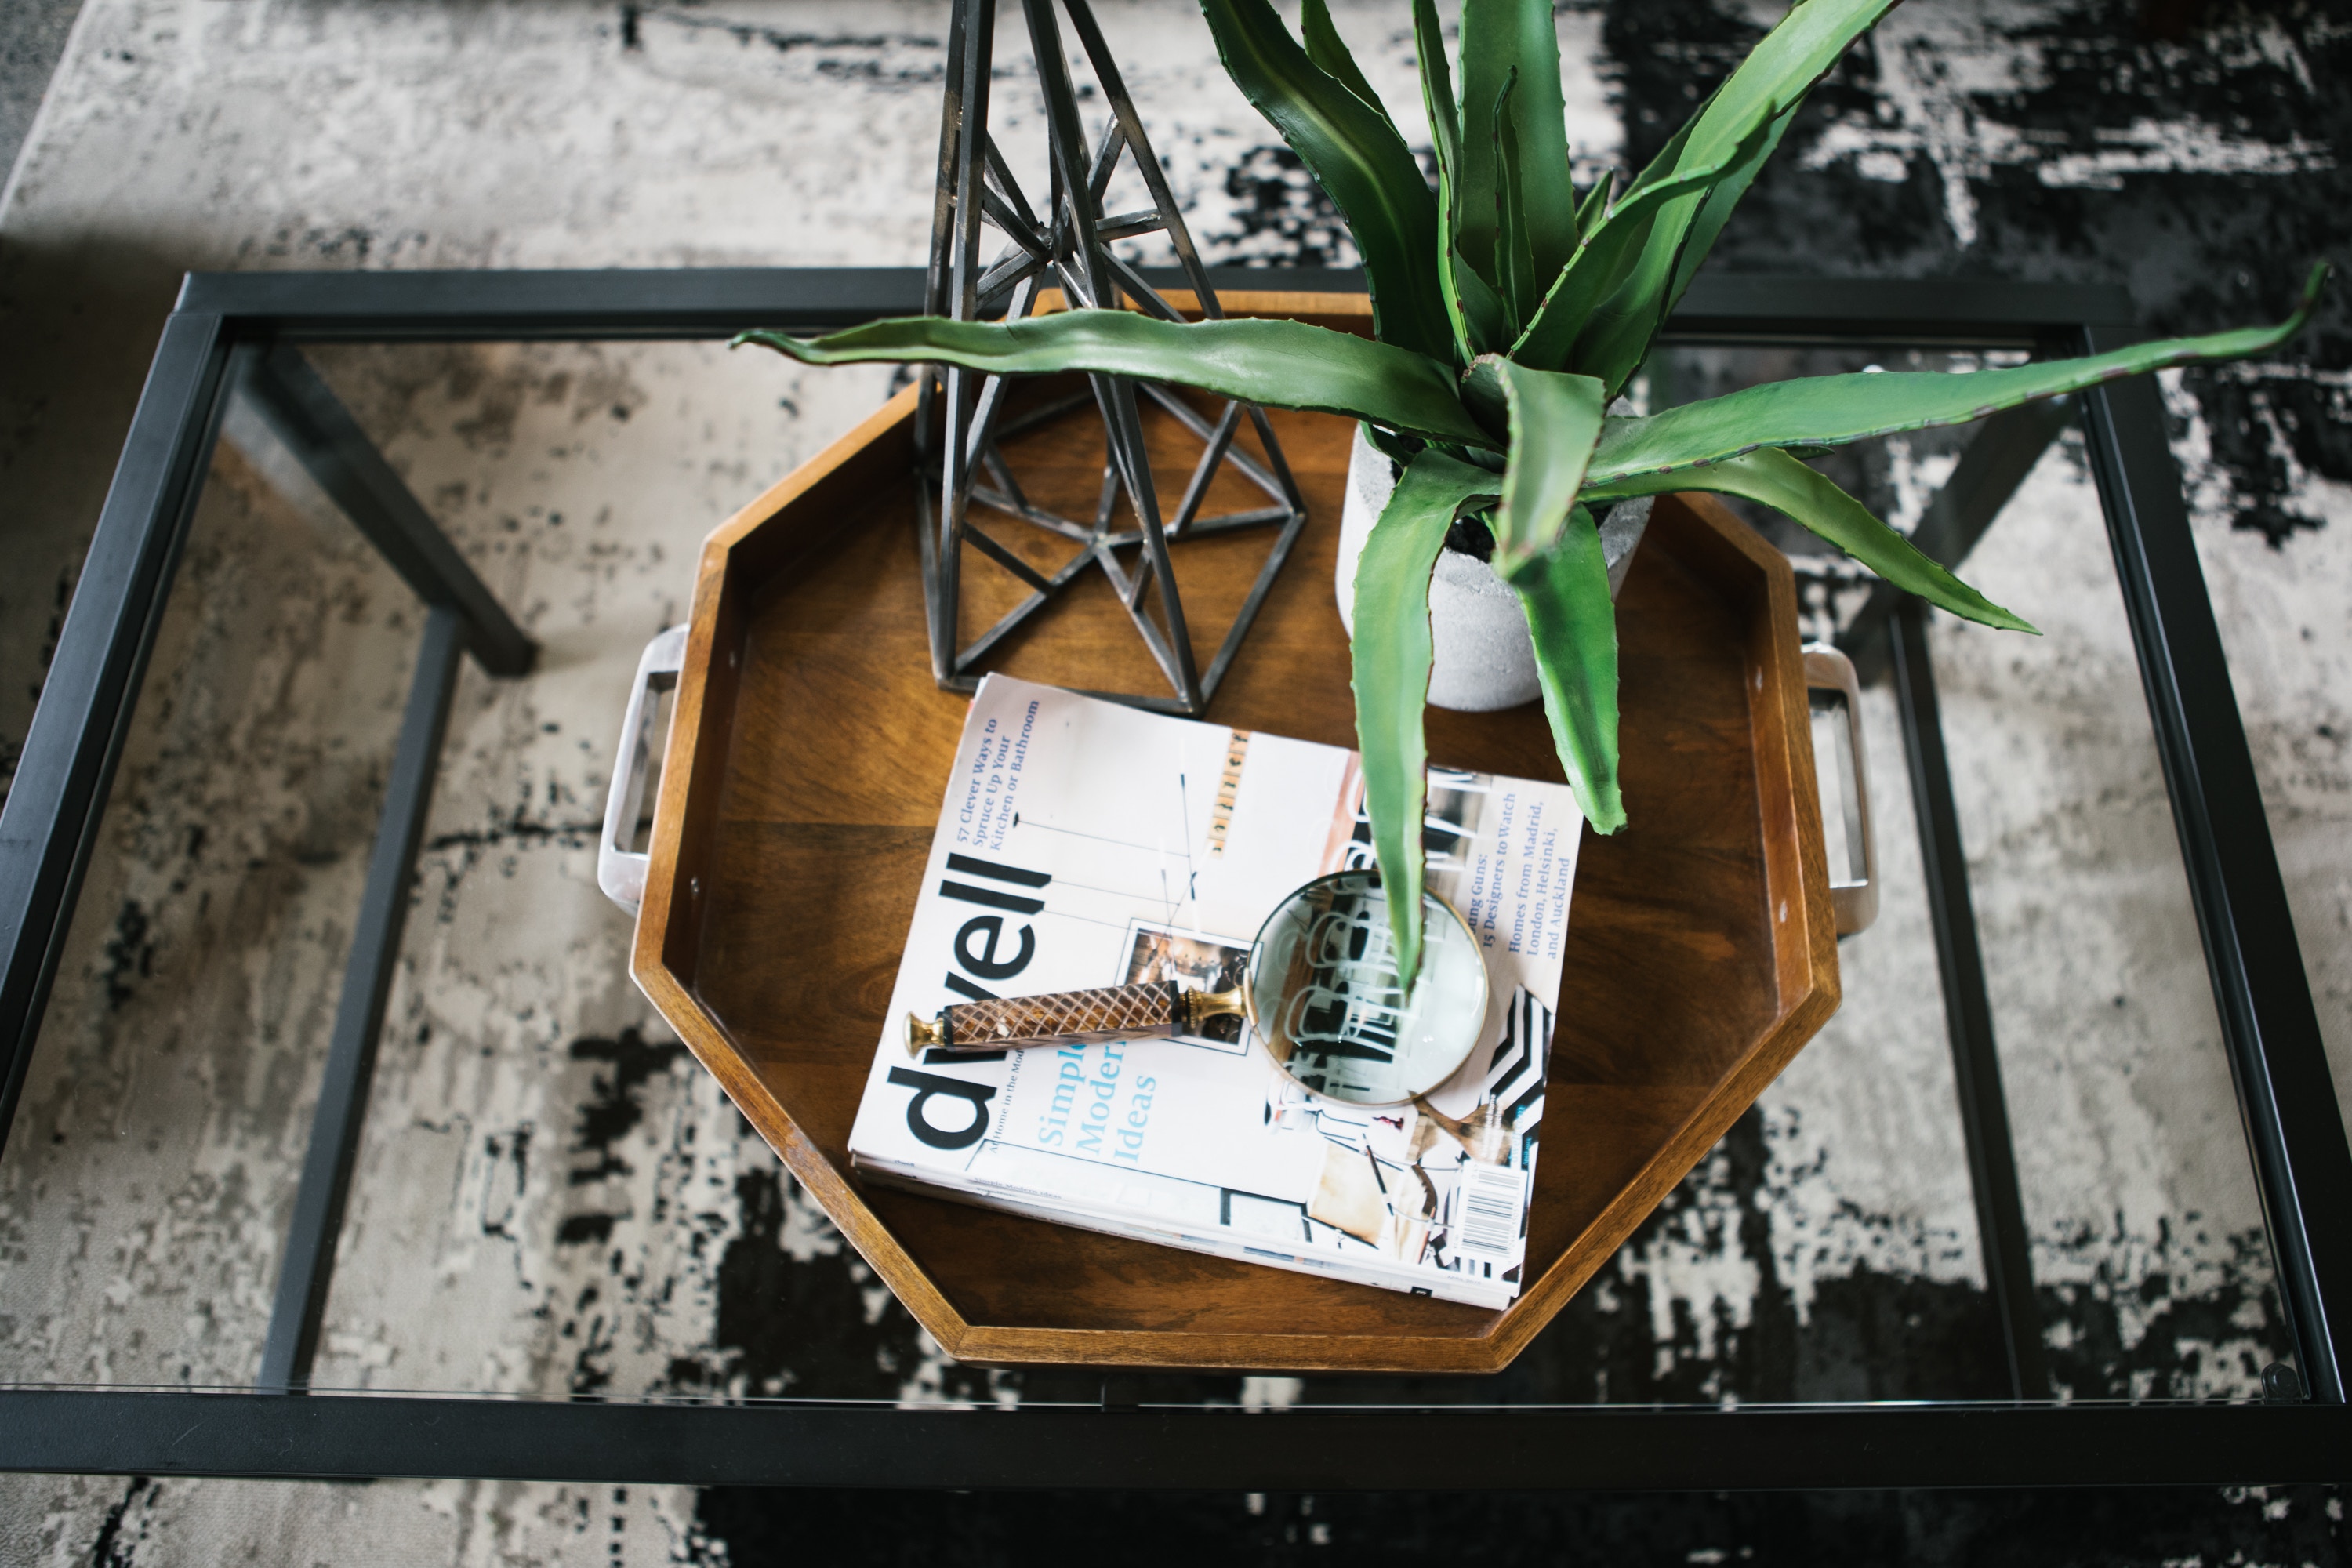 overhead view of a glass coffee table with a small aloe vera plant in a white pot beside an architecture design magazine and a magnifying glass